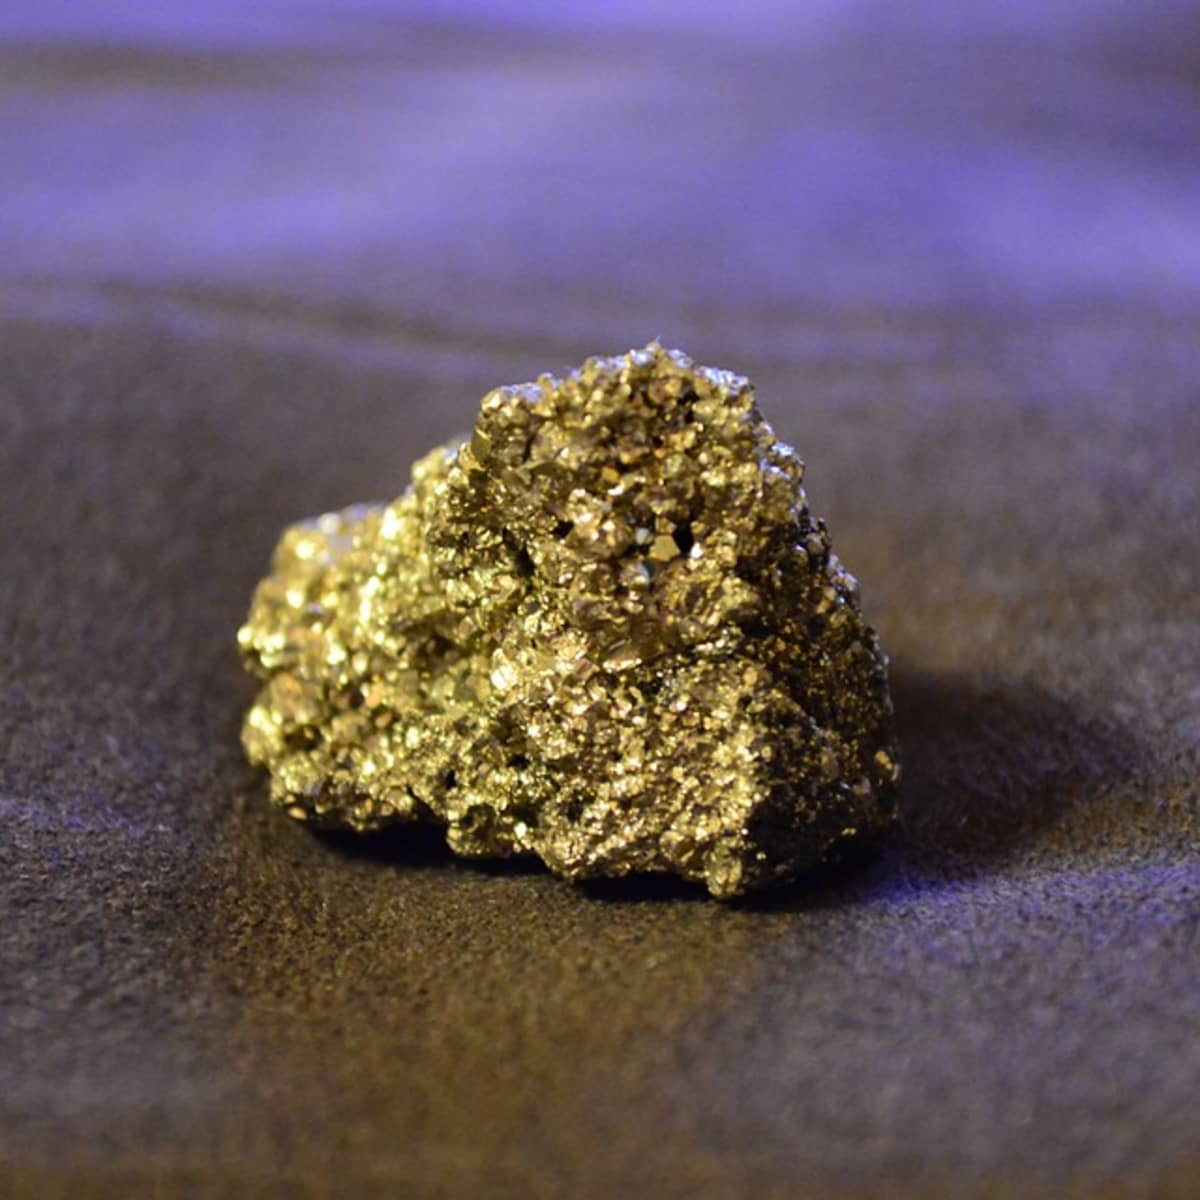 Pyrite: The Real Story Behind “Fool's Gold”